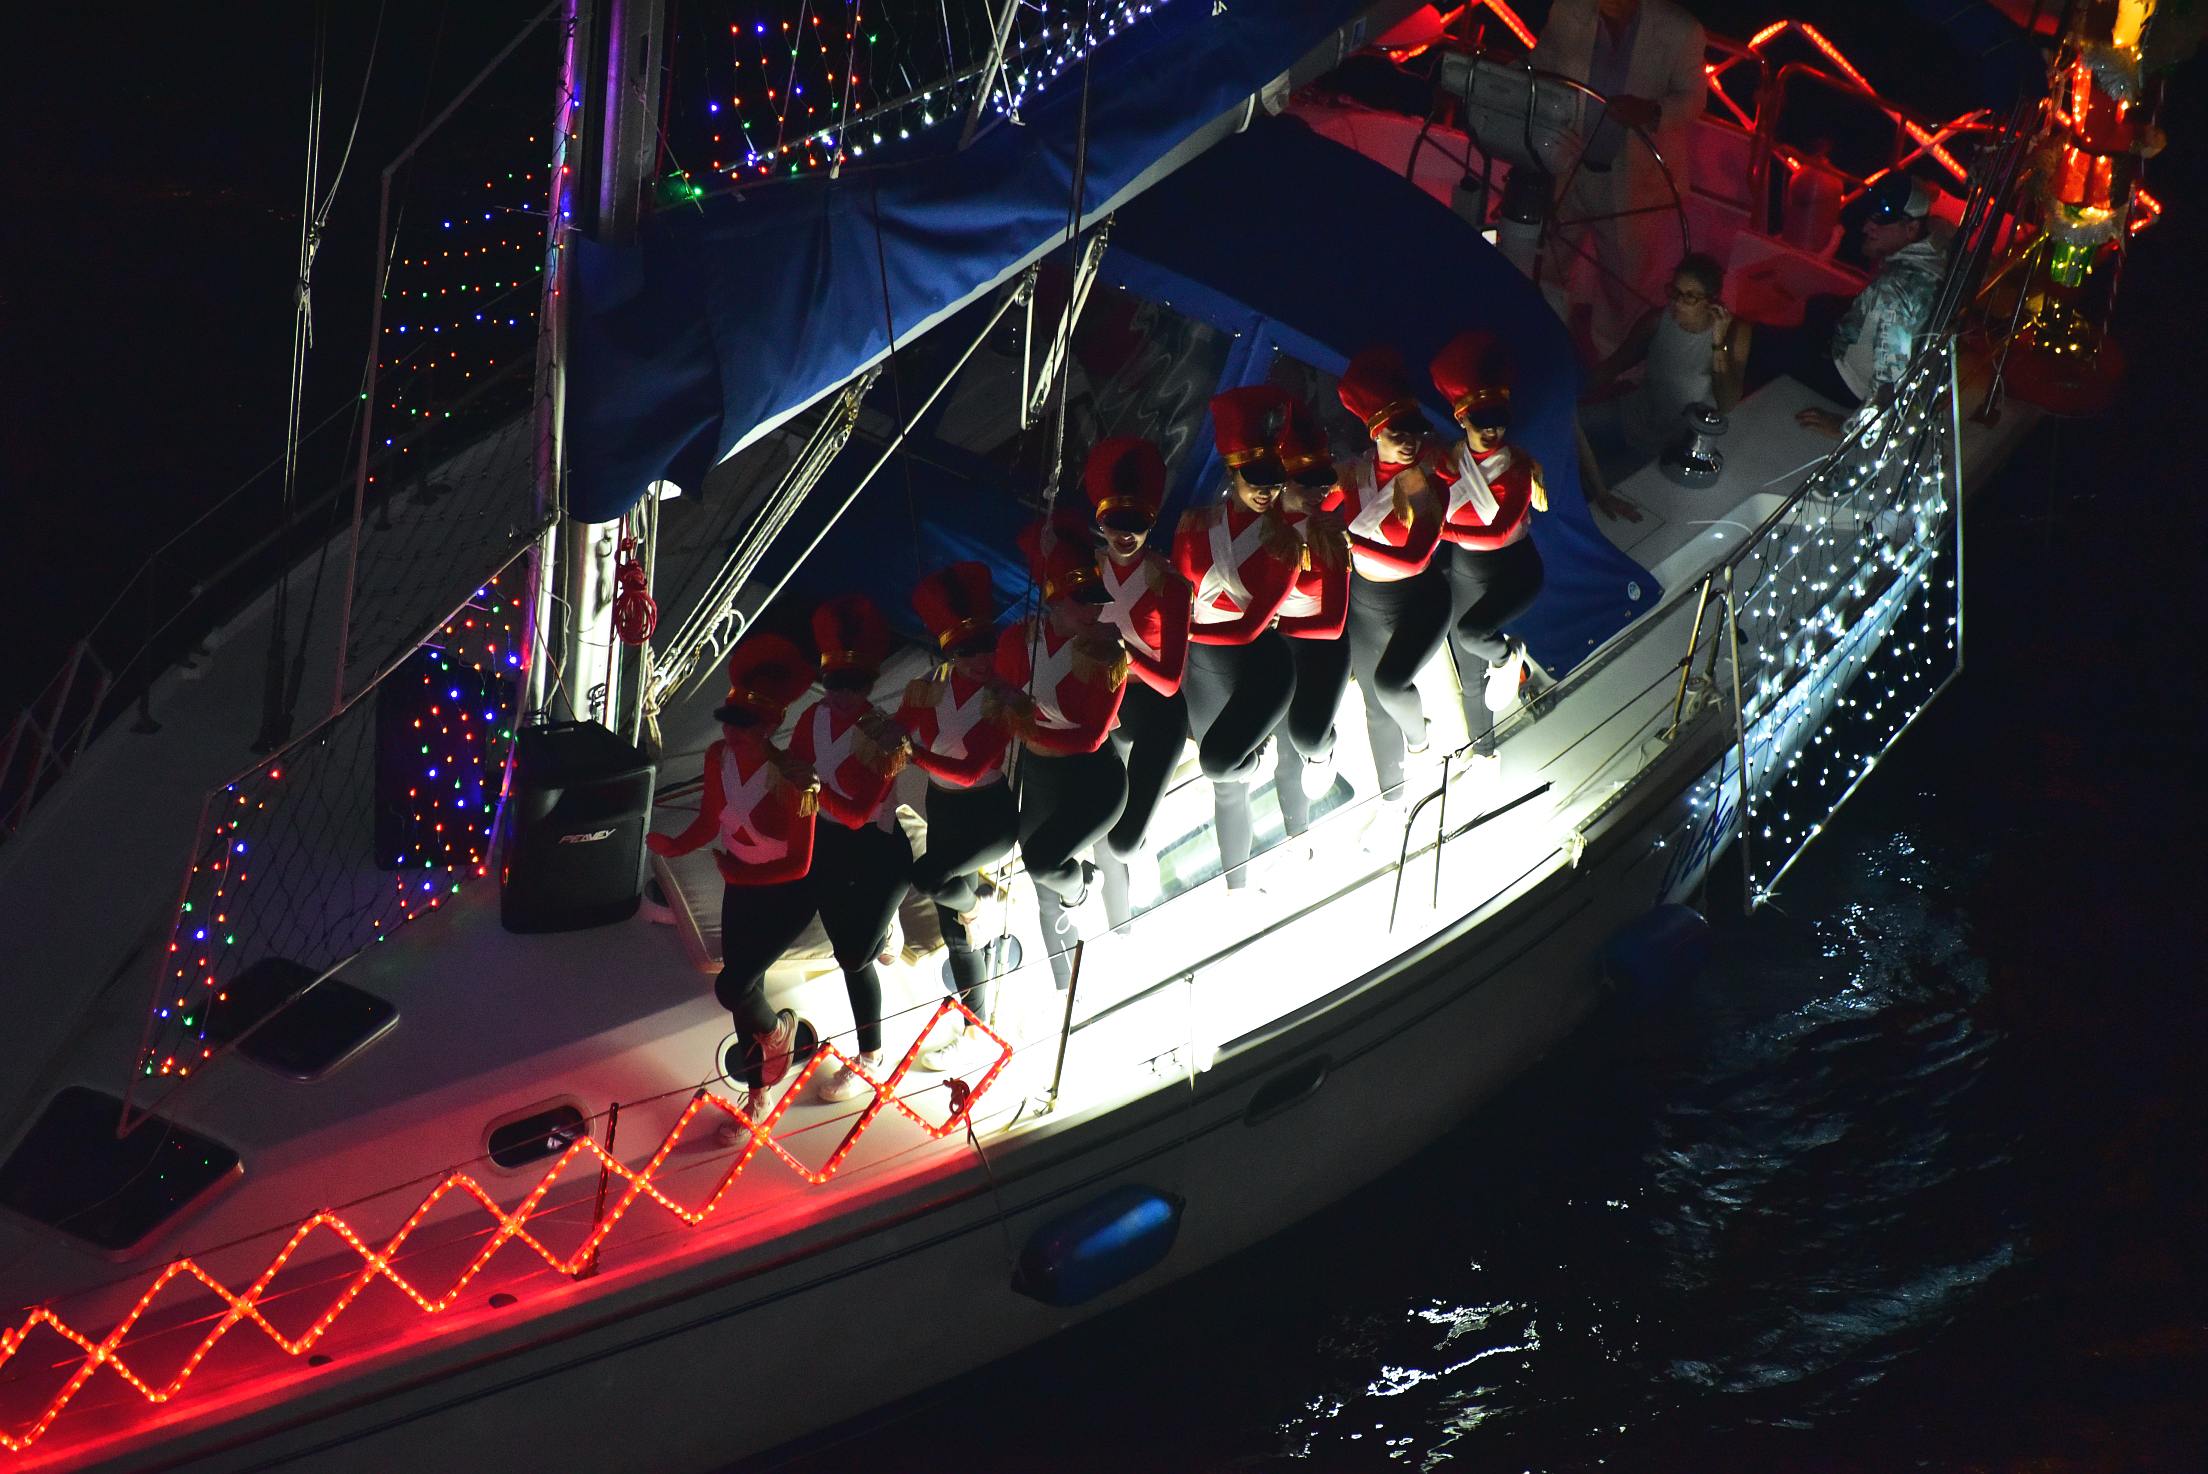 Toy Soldiers on board Otter, boat number 33 in the 2021 Winterfest Boat Parade